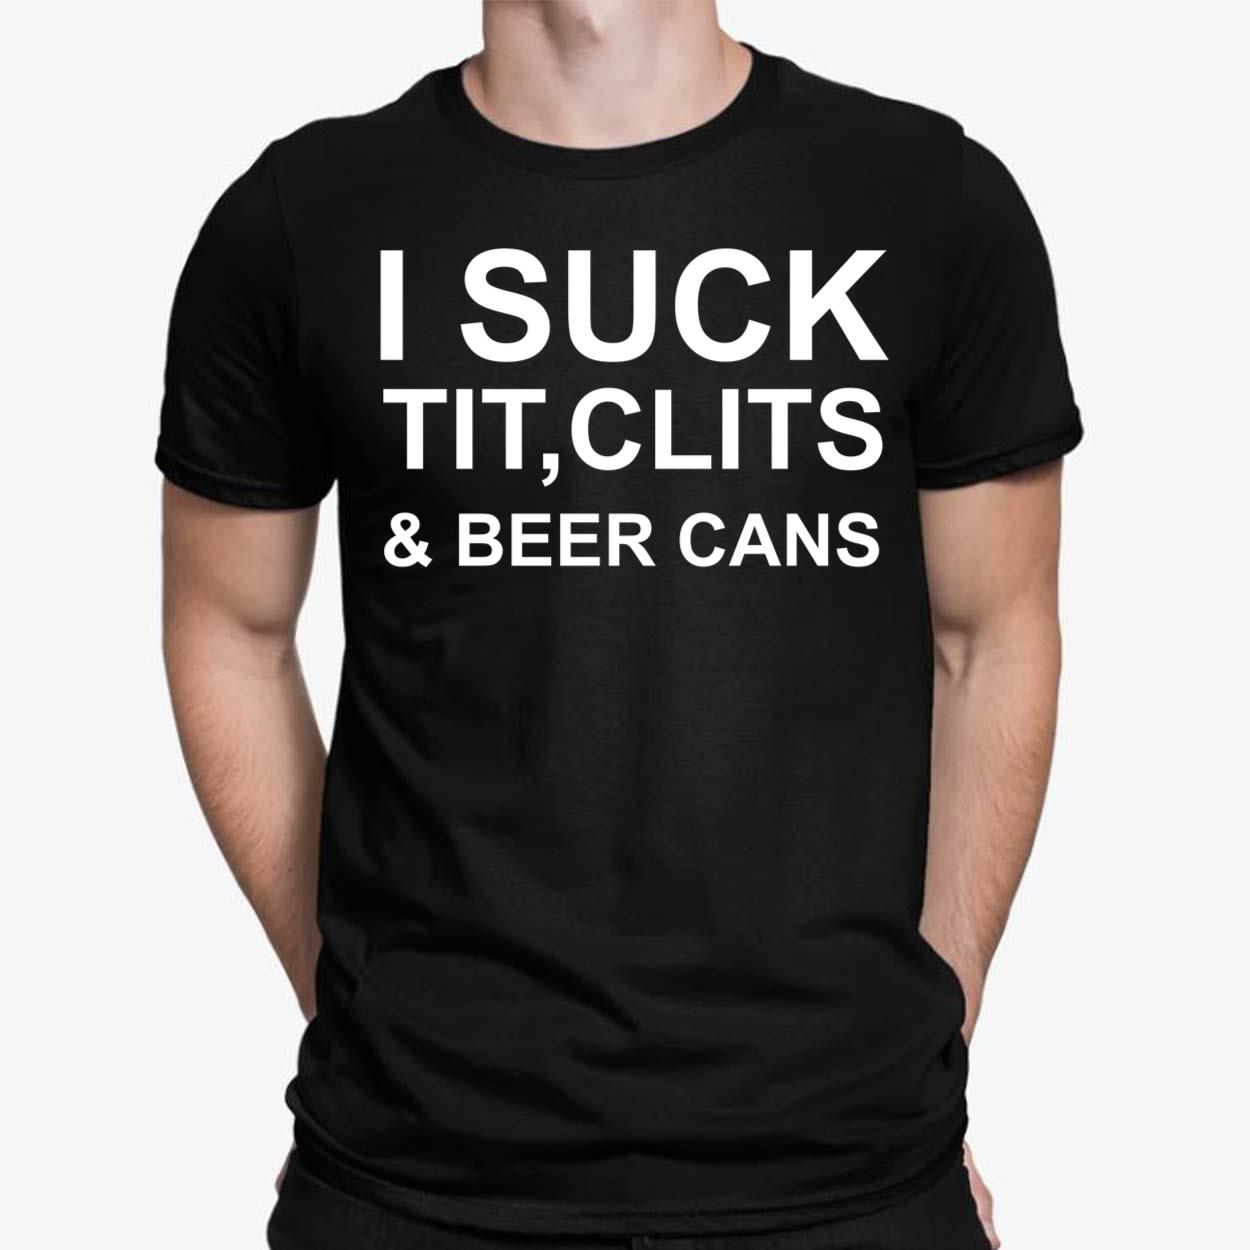 I suck tit clits and beer cans | Essential T-Shirt